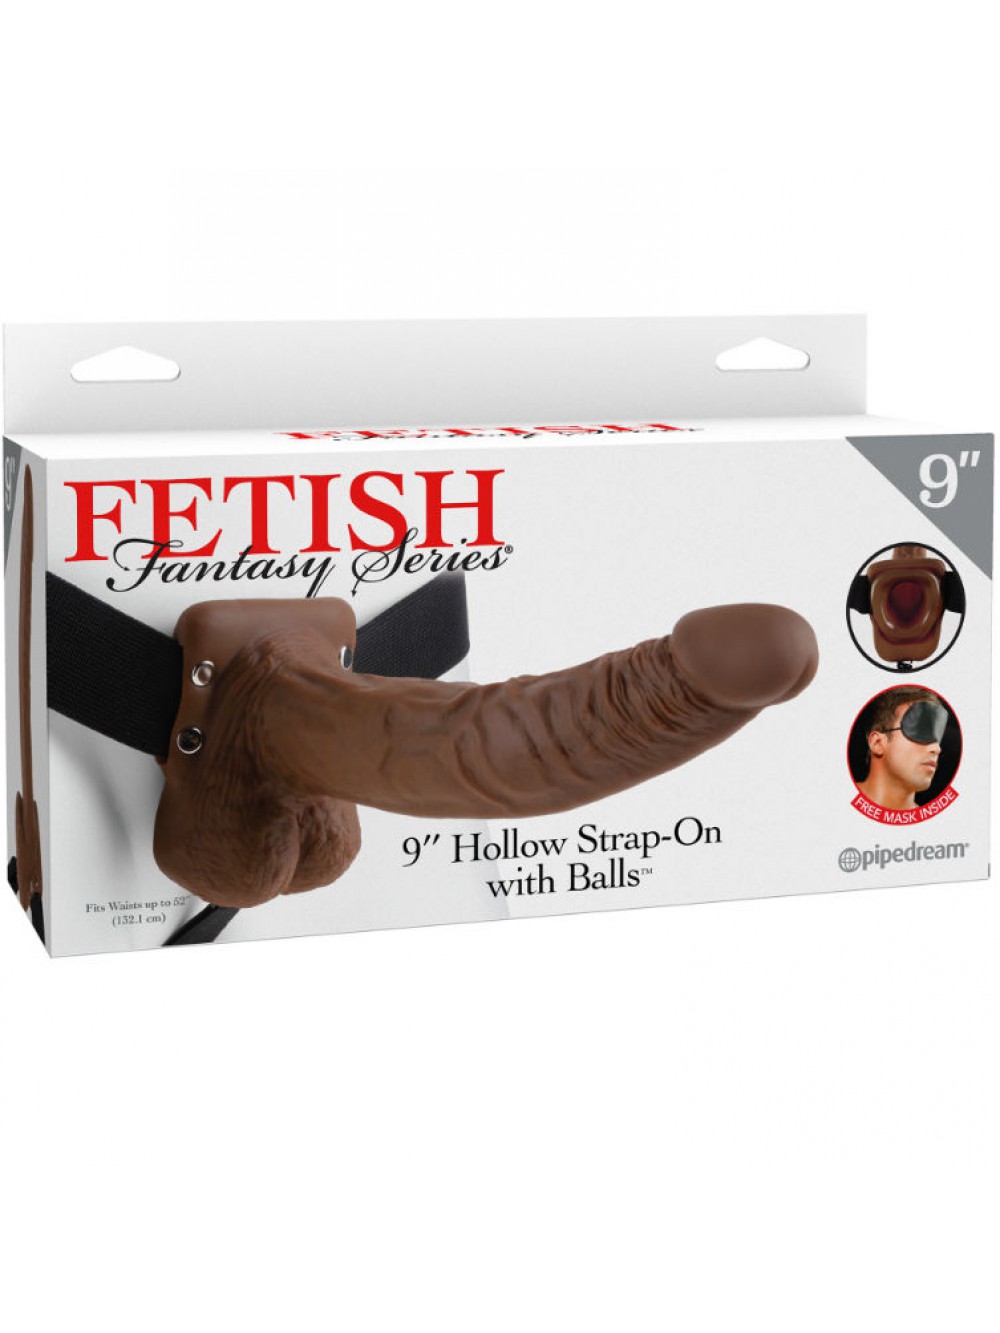 FETISH FANTASY SERIES 9" HOLLOW STRAP-ON WITH BALLS 22.9CM BROWN 603912362763